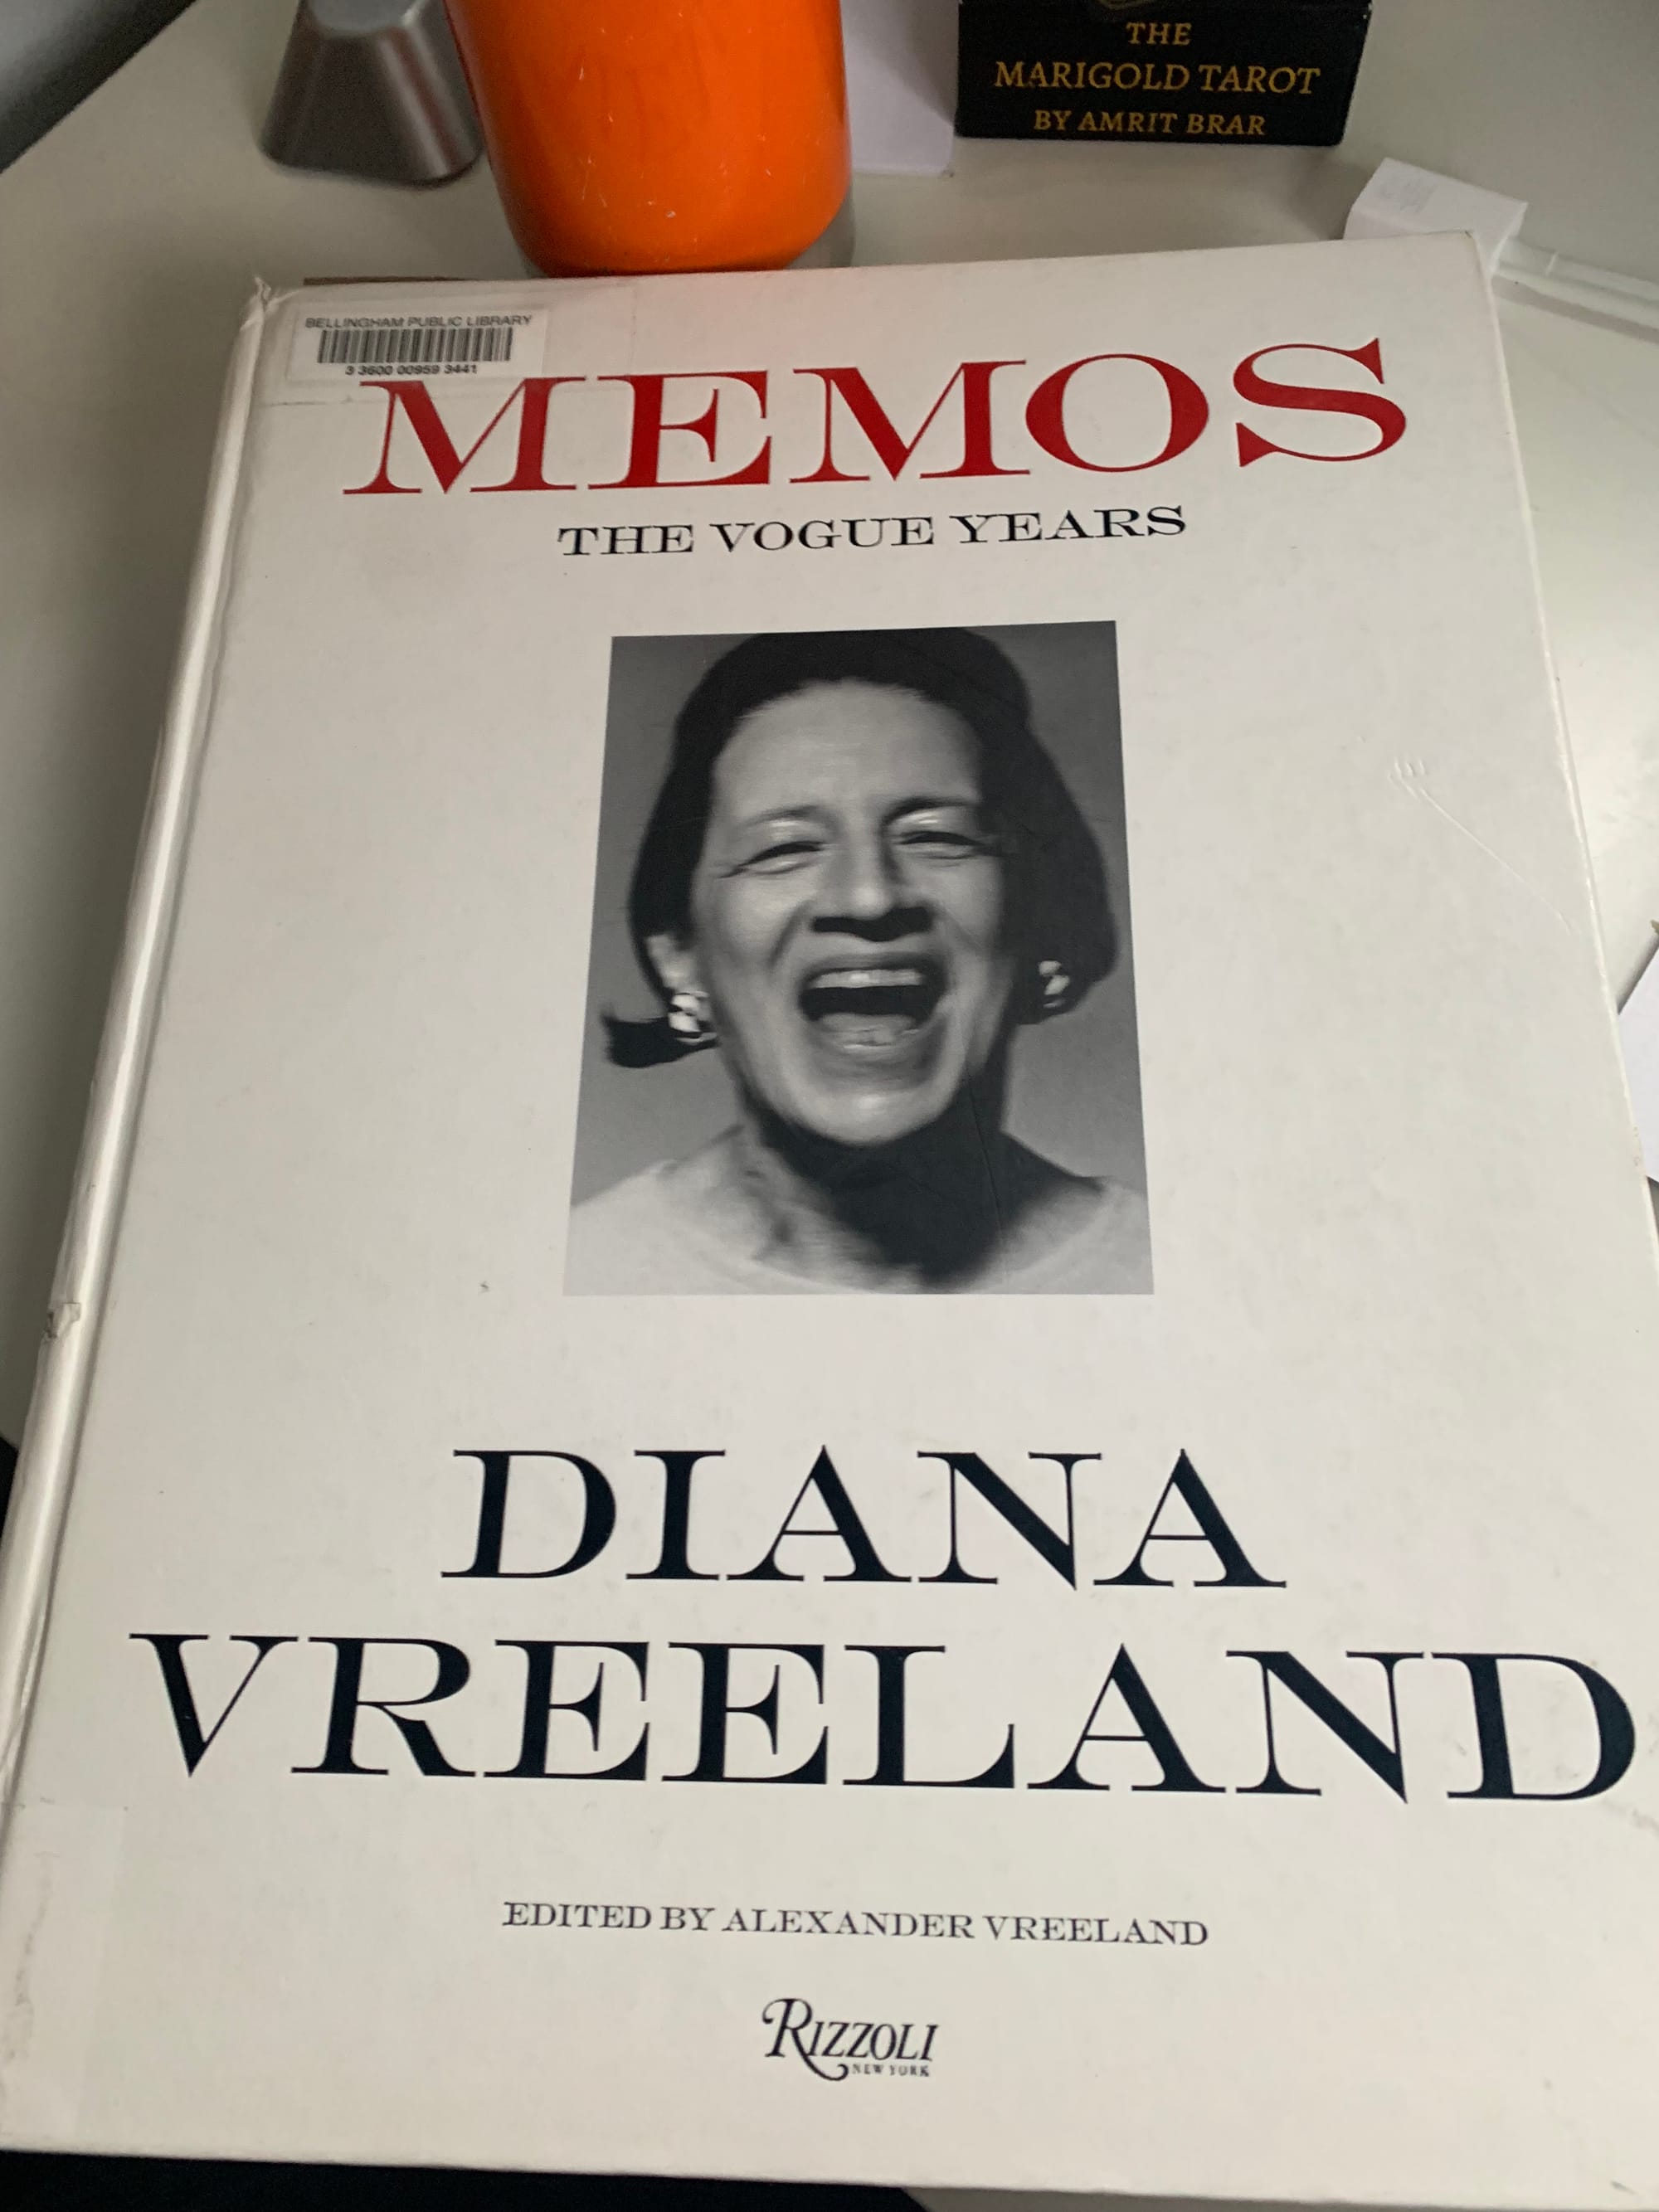 the cover of Diana Vreeland's Memos, a large white book with a black & white photo of a woman laughing